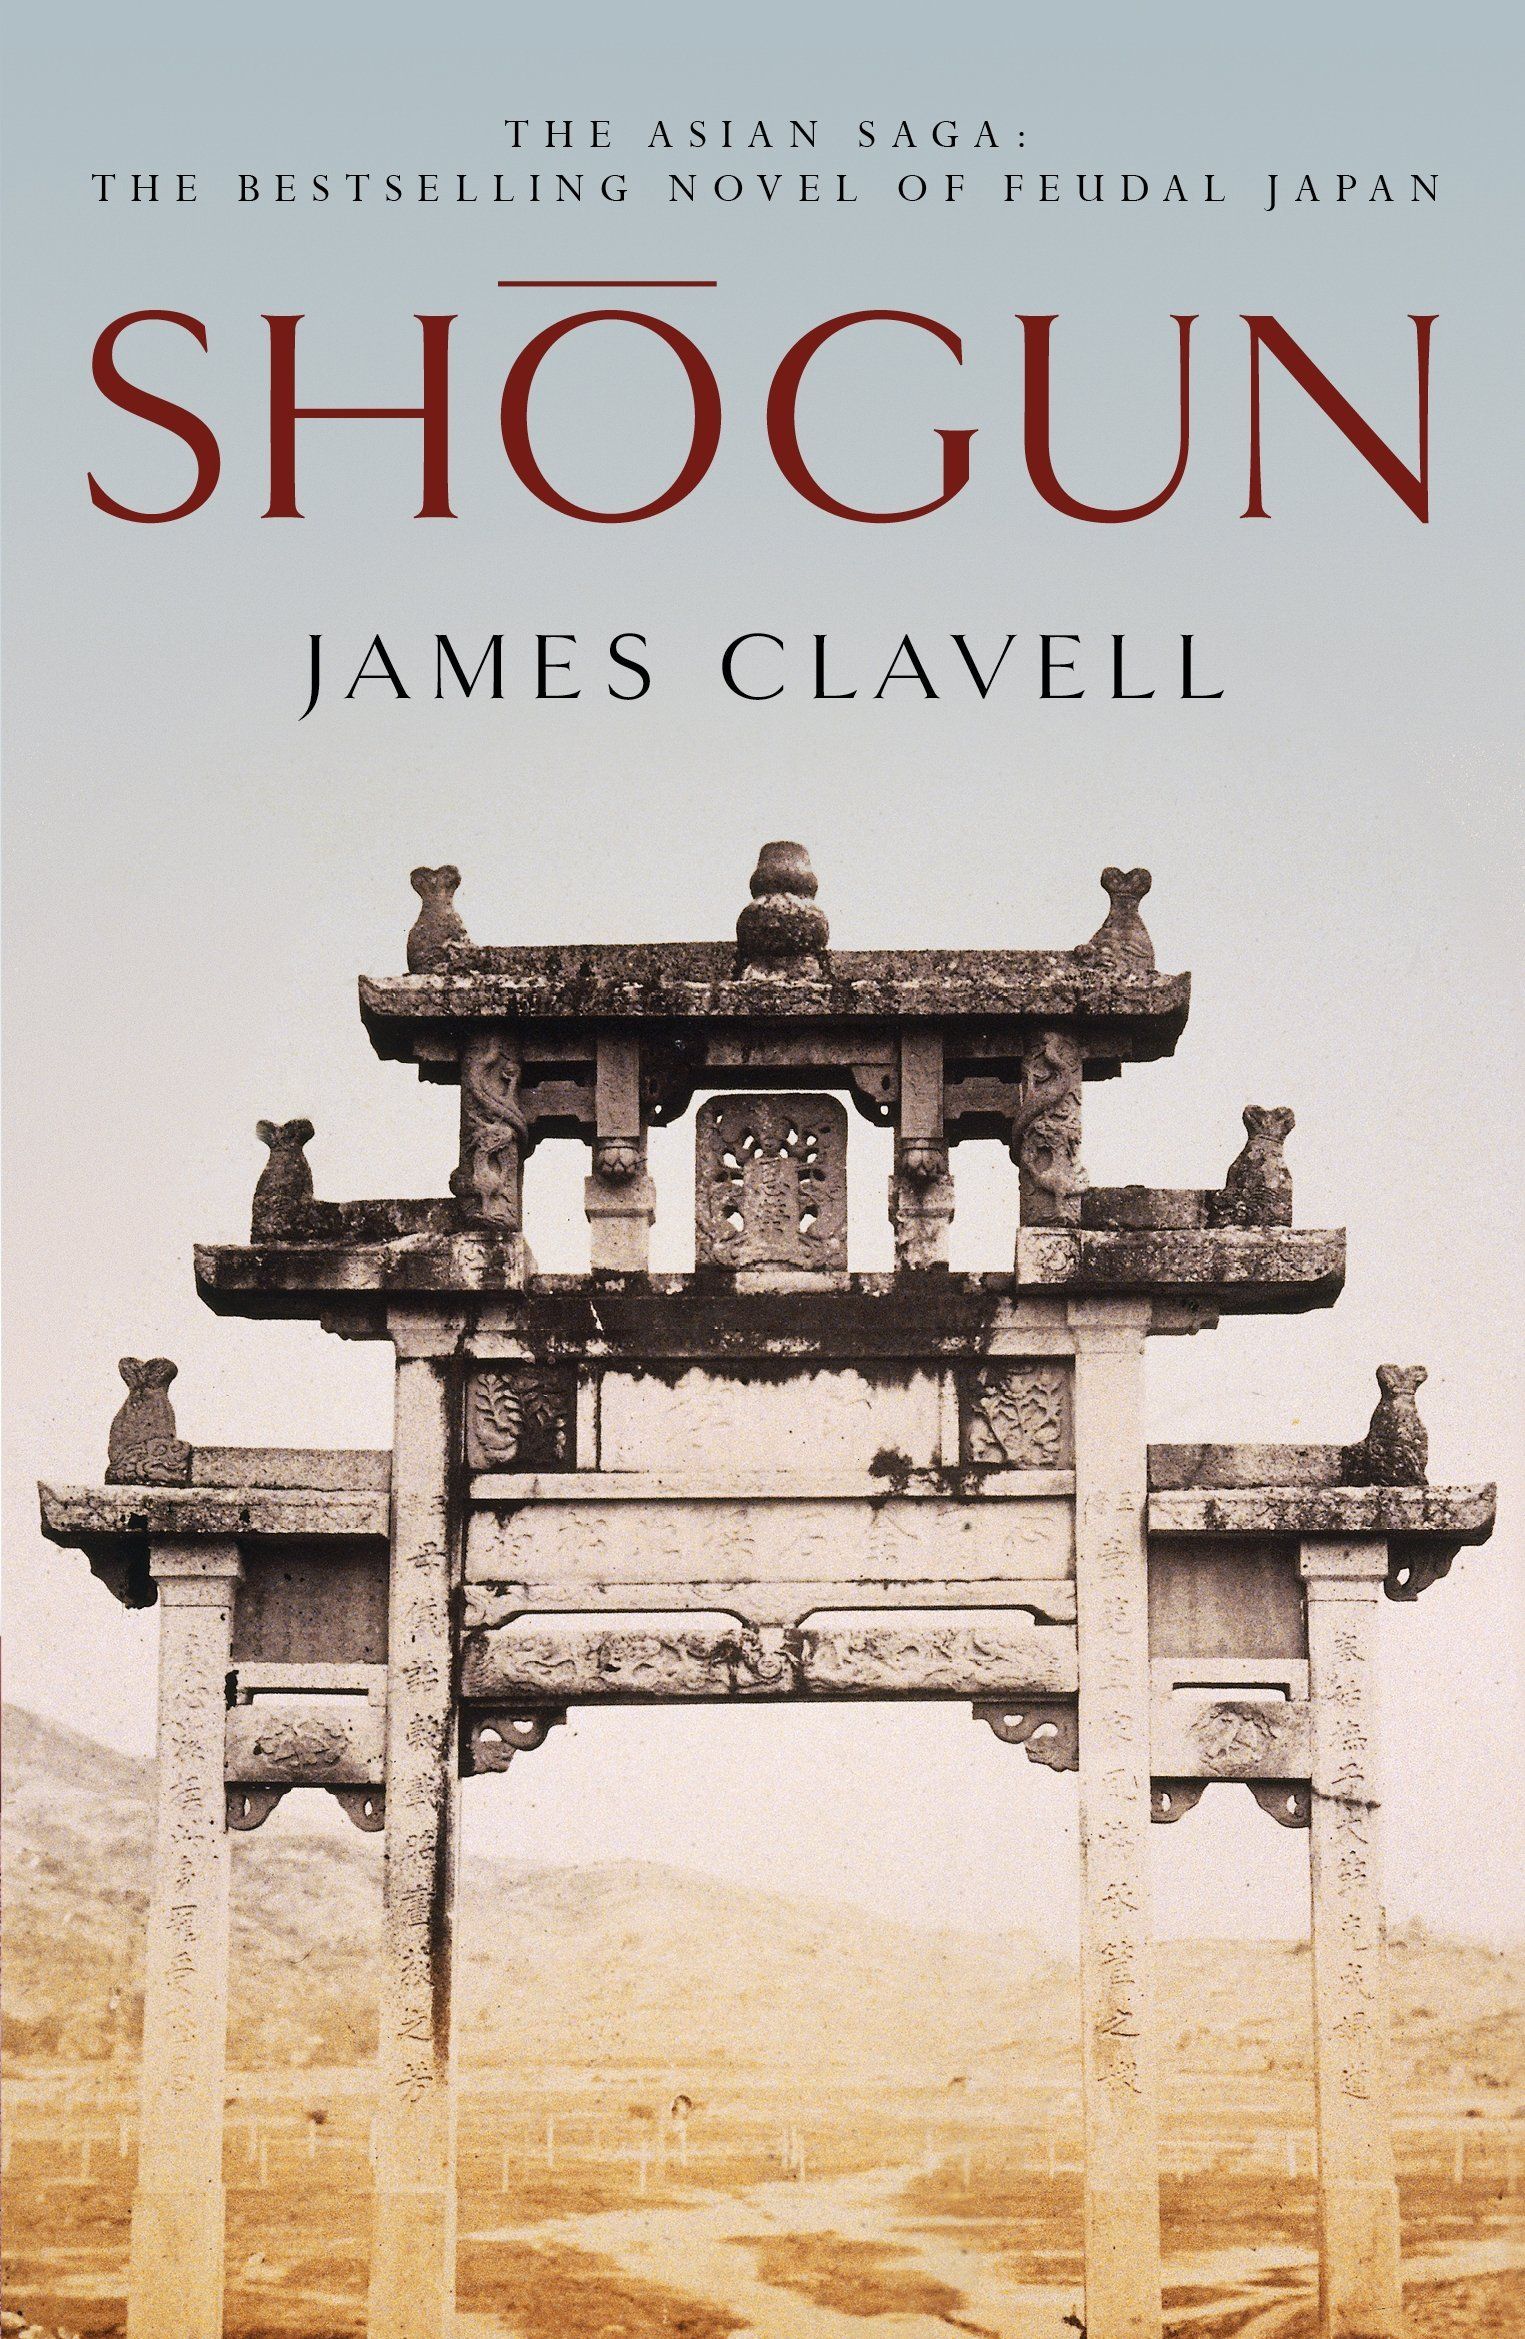 James clavell asian